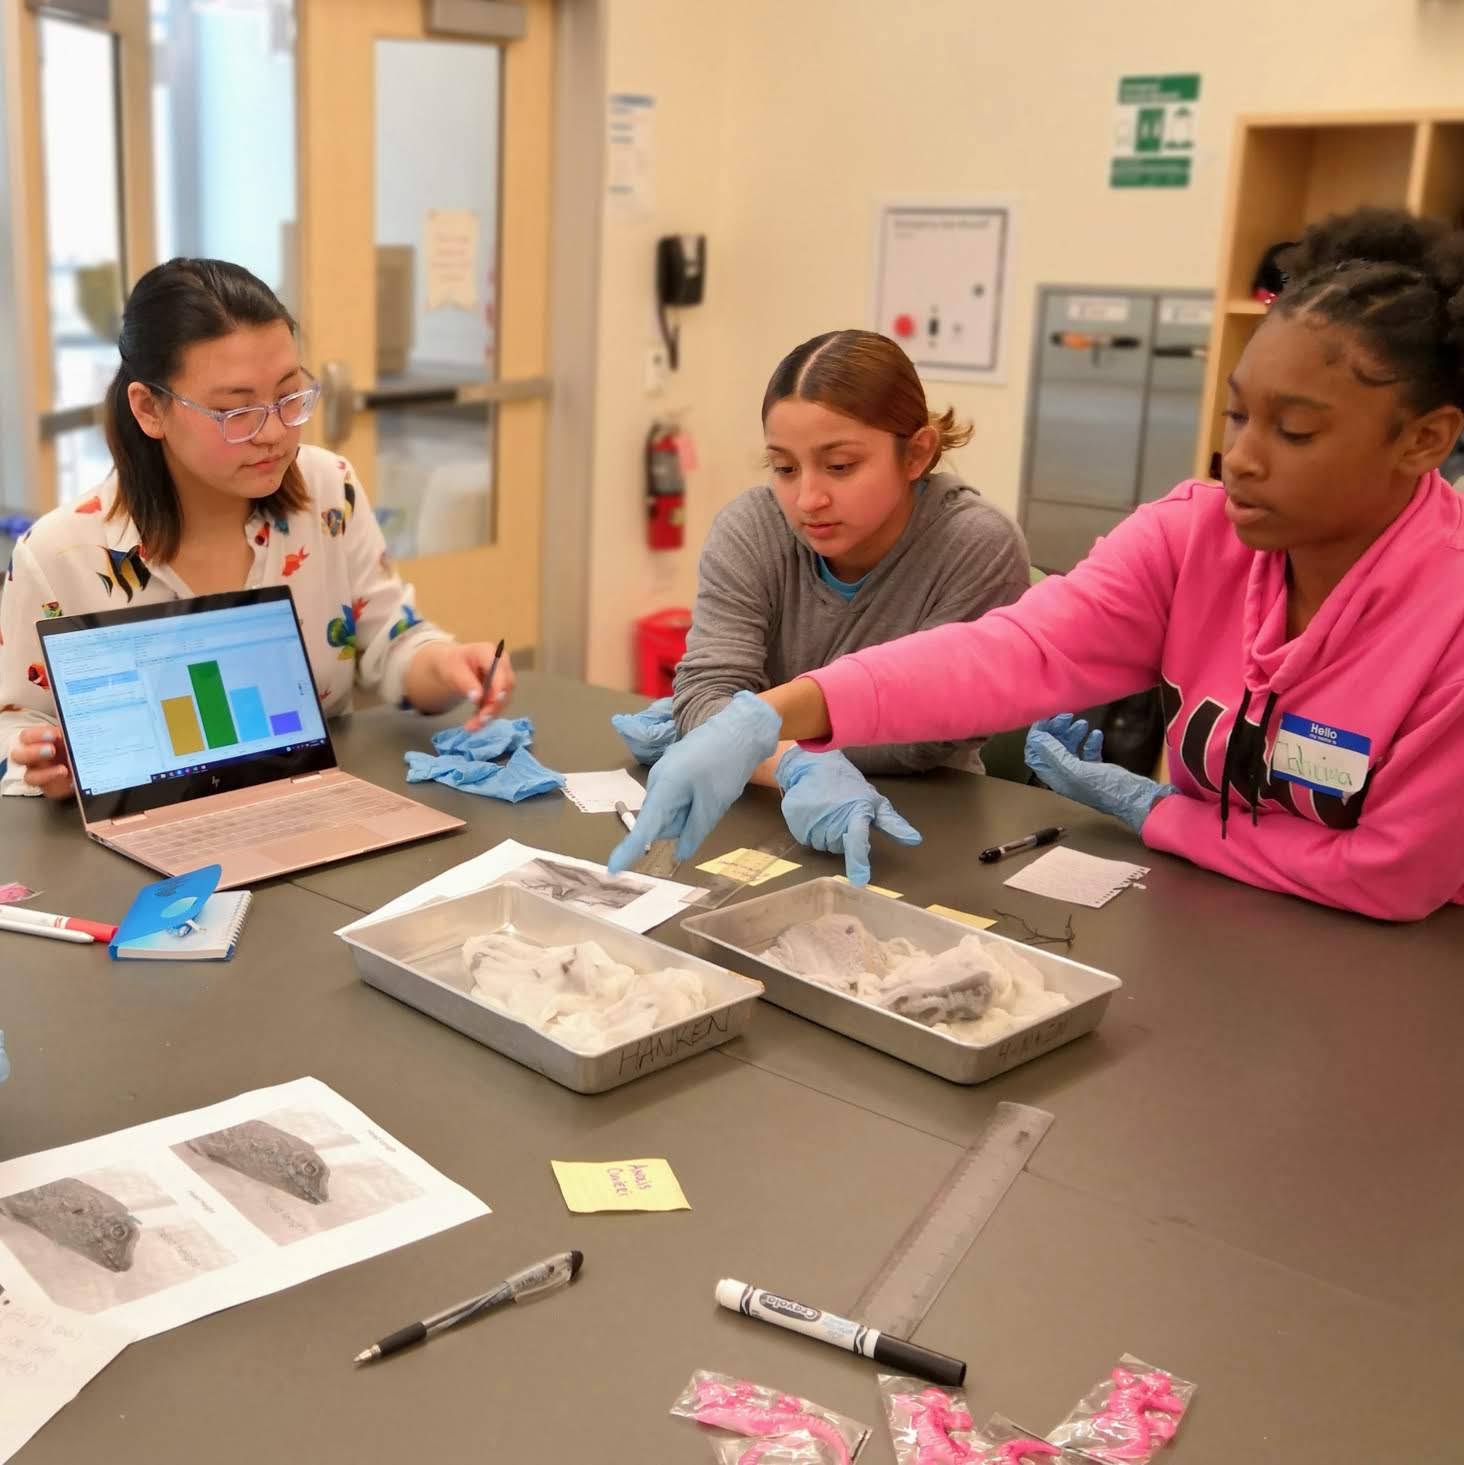 Students reach for specimens in trays to examine.